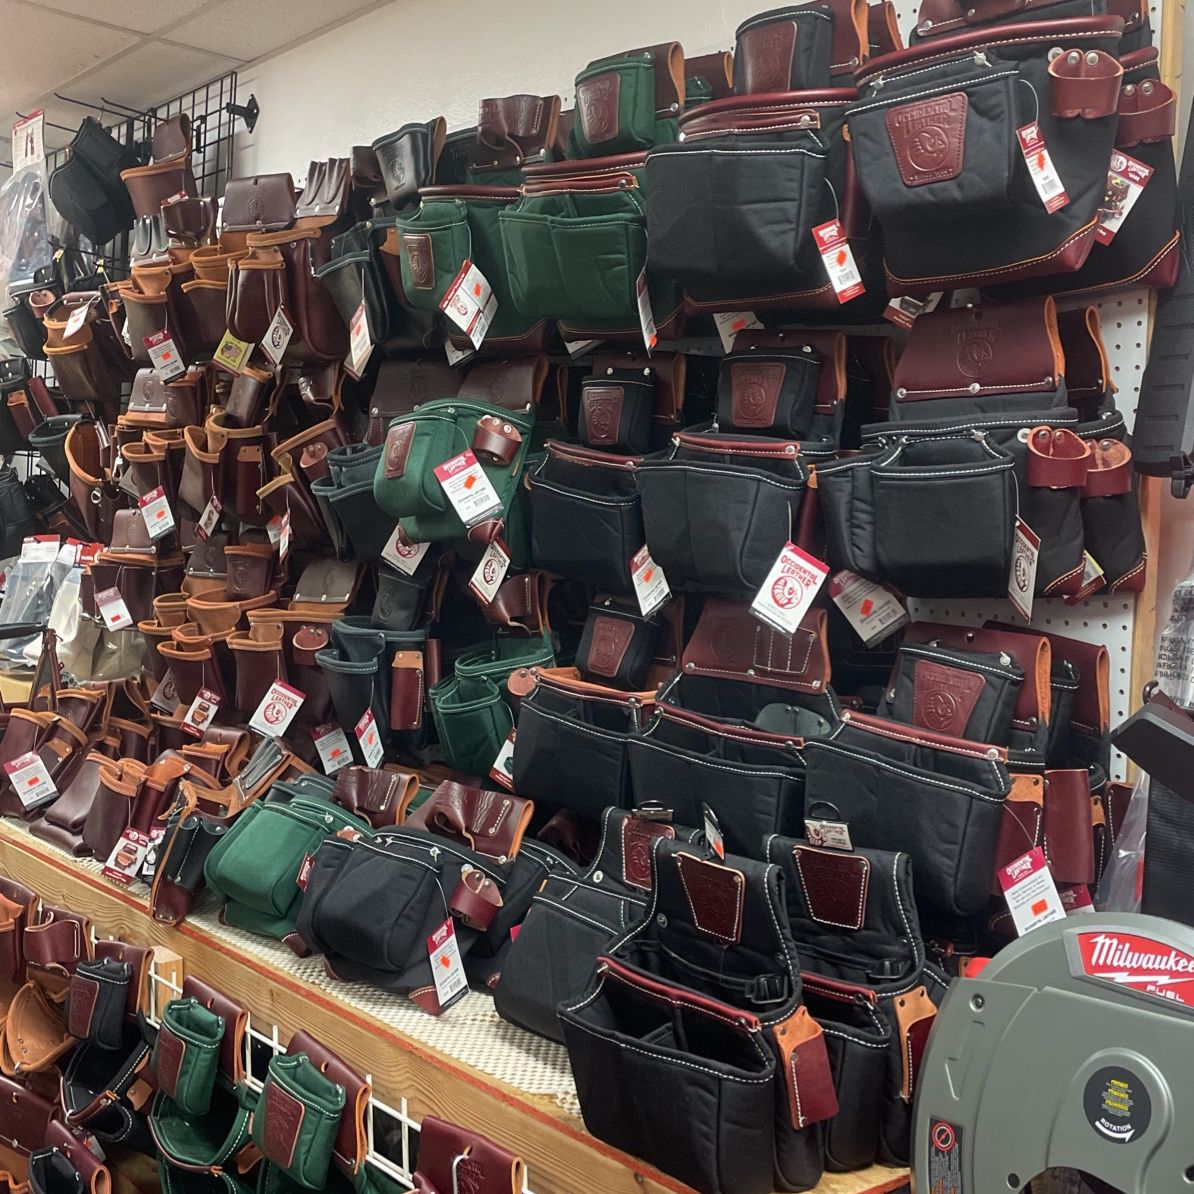 OCCIDENTAL LEATHER TOOL BAGS ($137 EACH BAG)